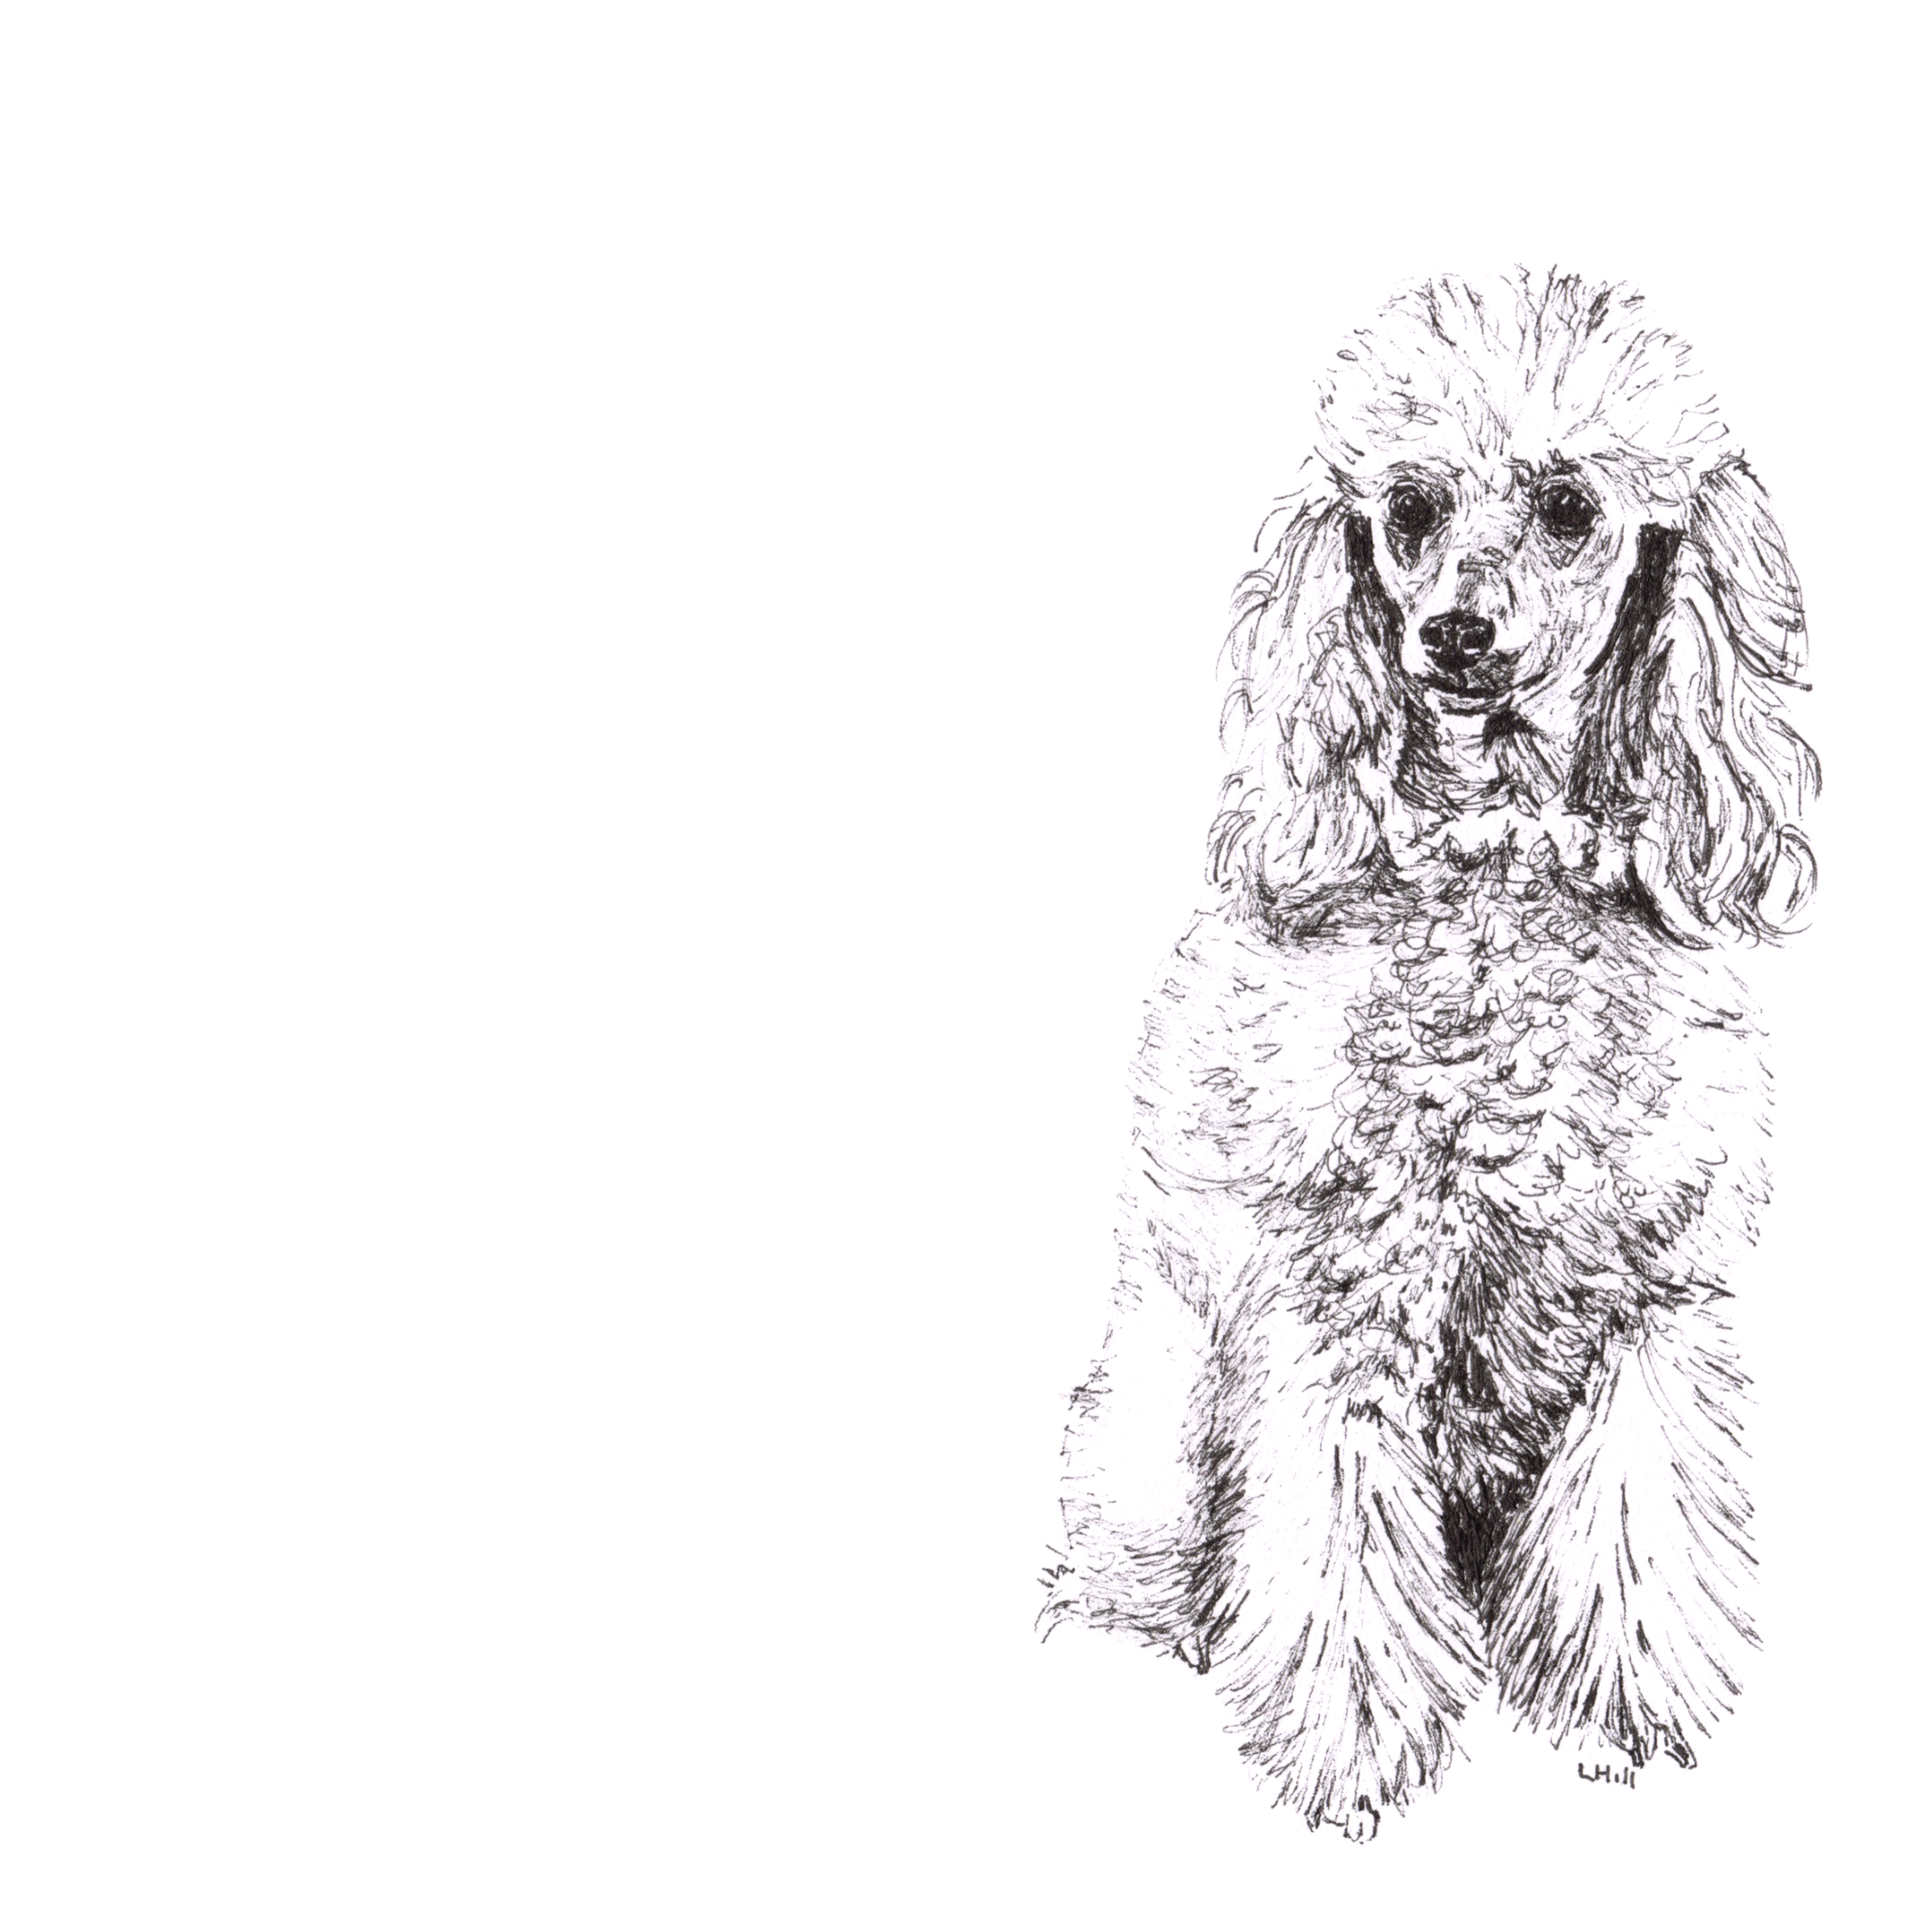 Poodle pen and ink illustration by Louisa Hill